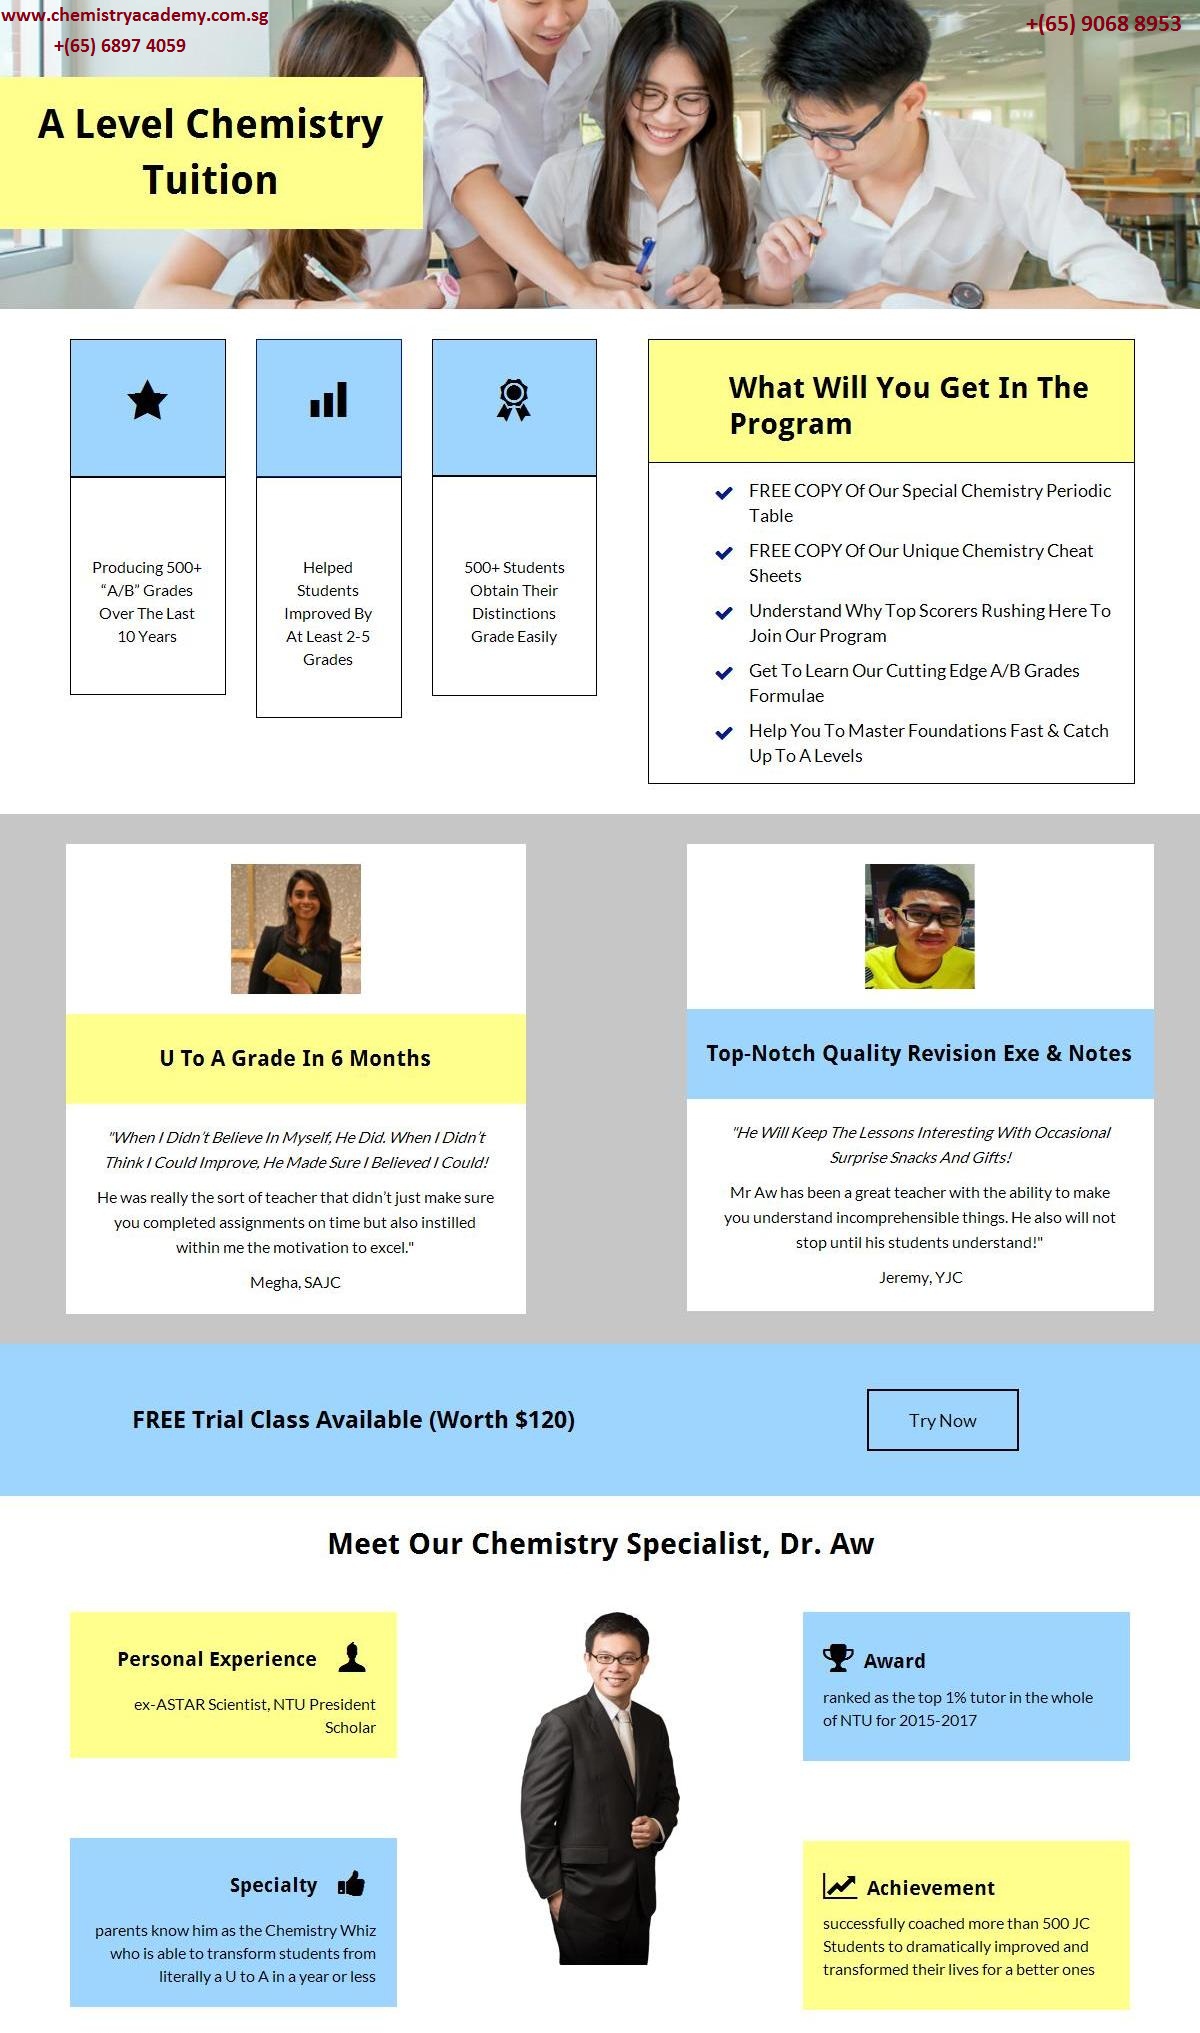 A Level Chemistry Tuition, Singapore